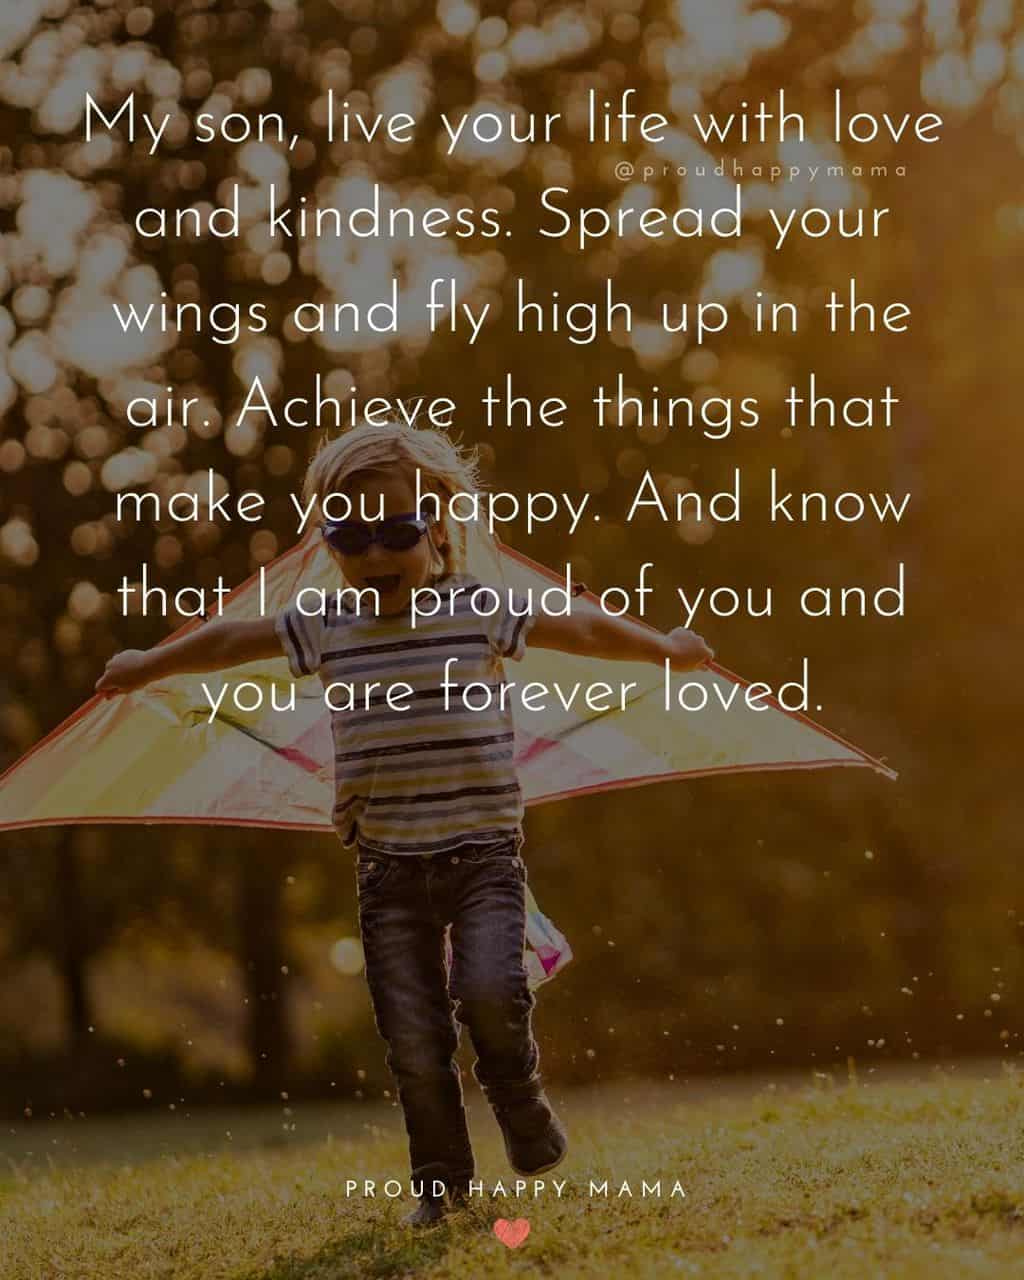 Son Quotes - My son, live your life with love and kindness. Spread your wings and fly high up in the air. Achieve the things